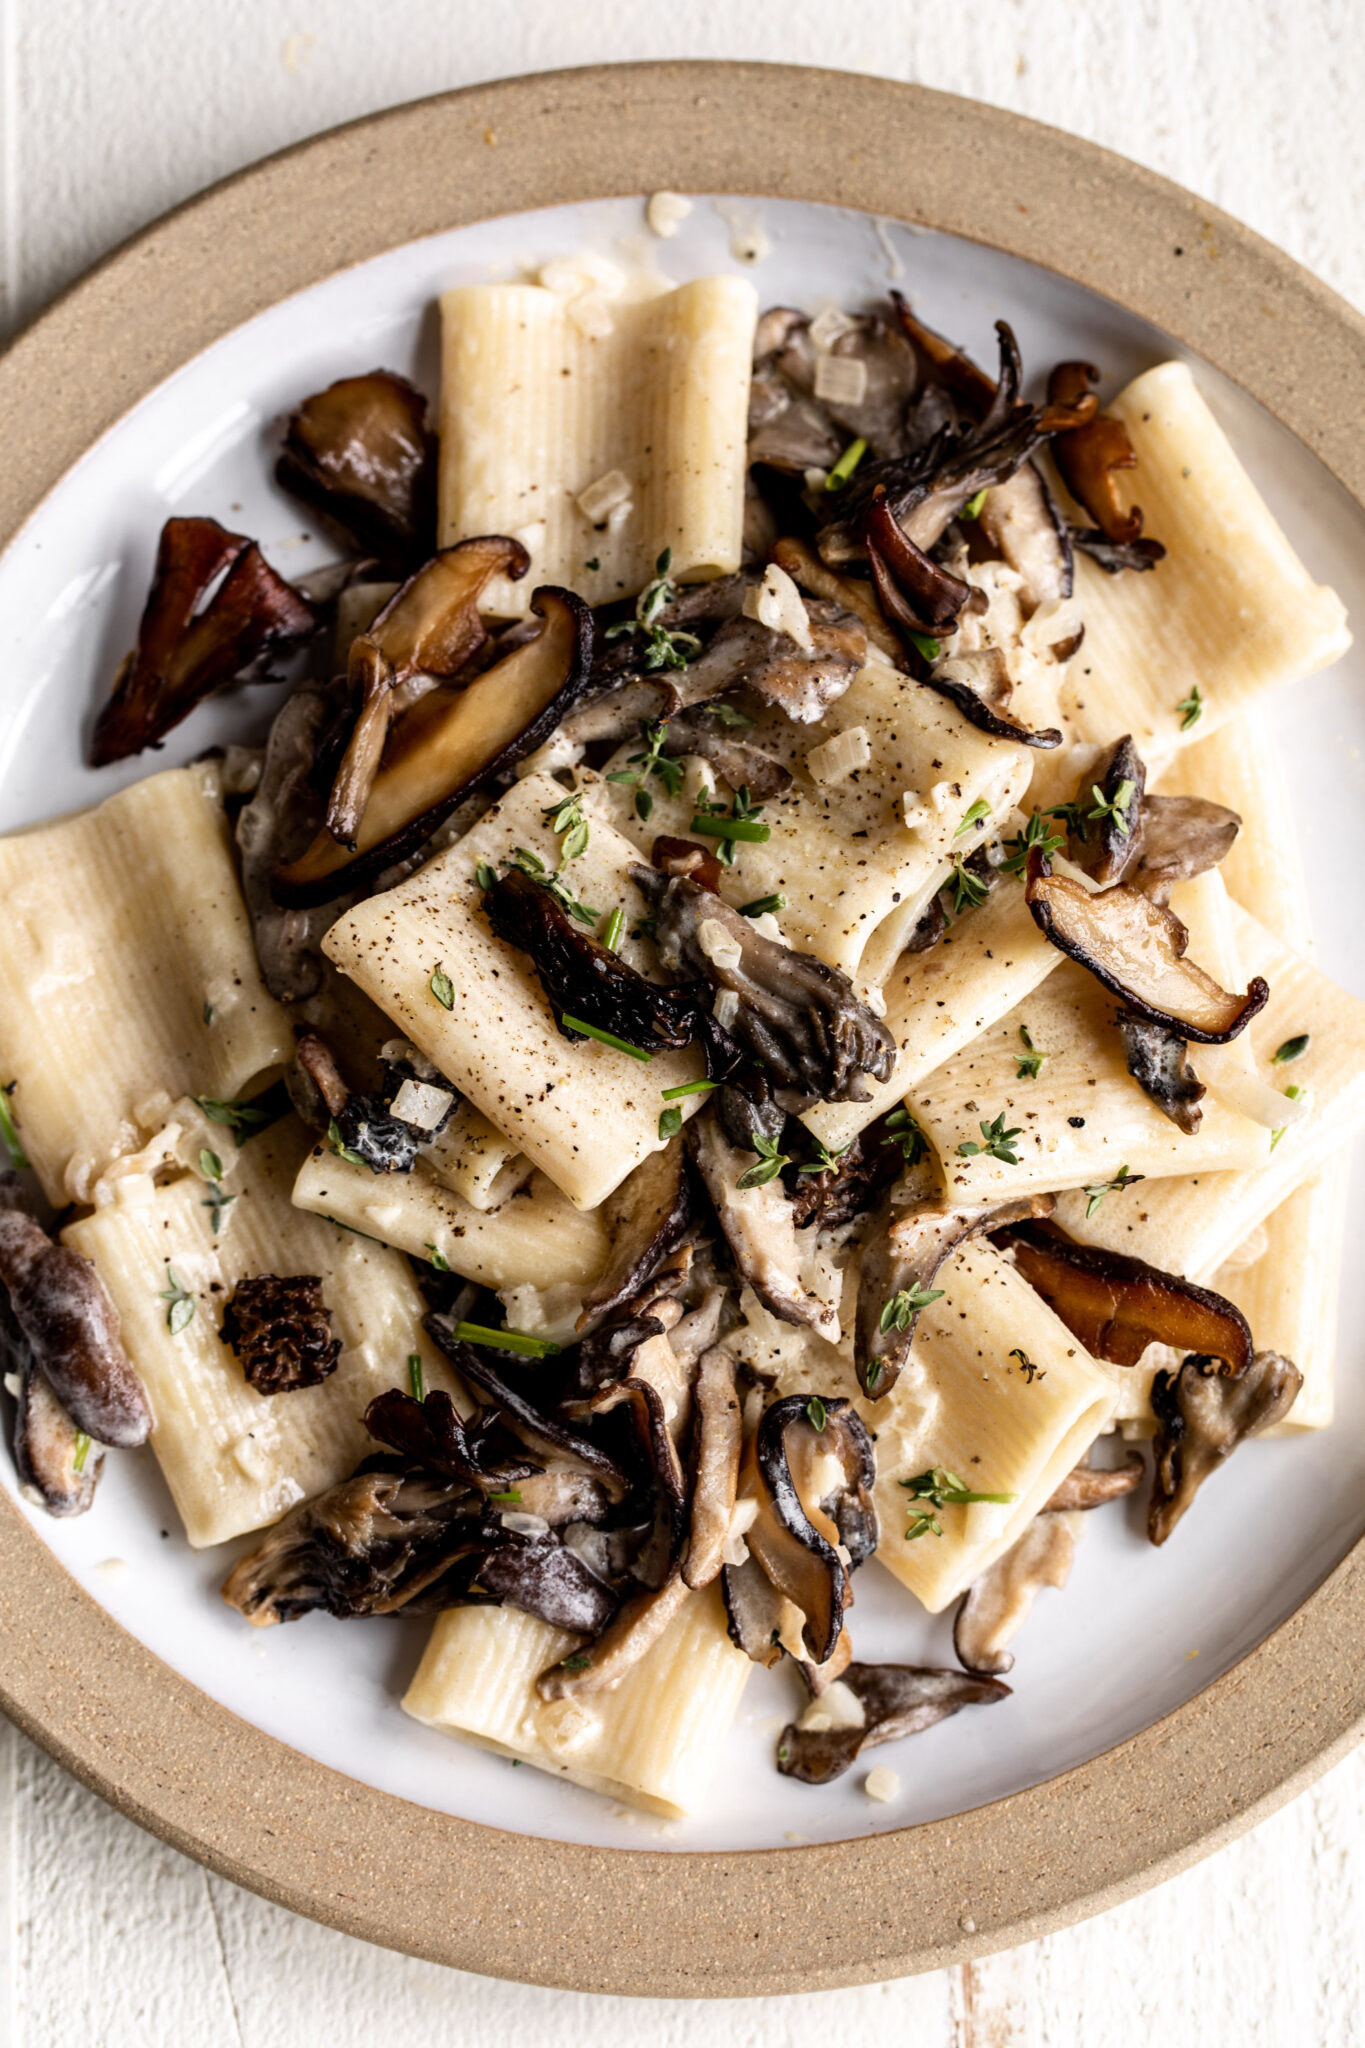 Pasta with mushrooms and Alfredo sauce